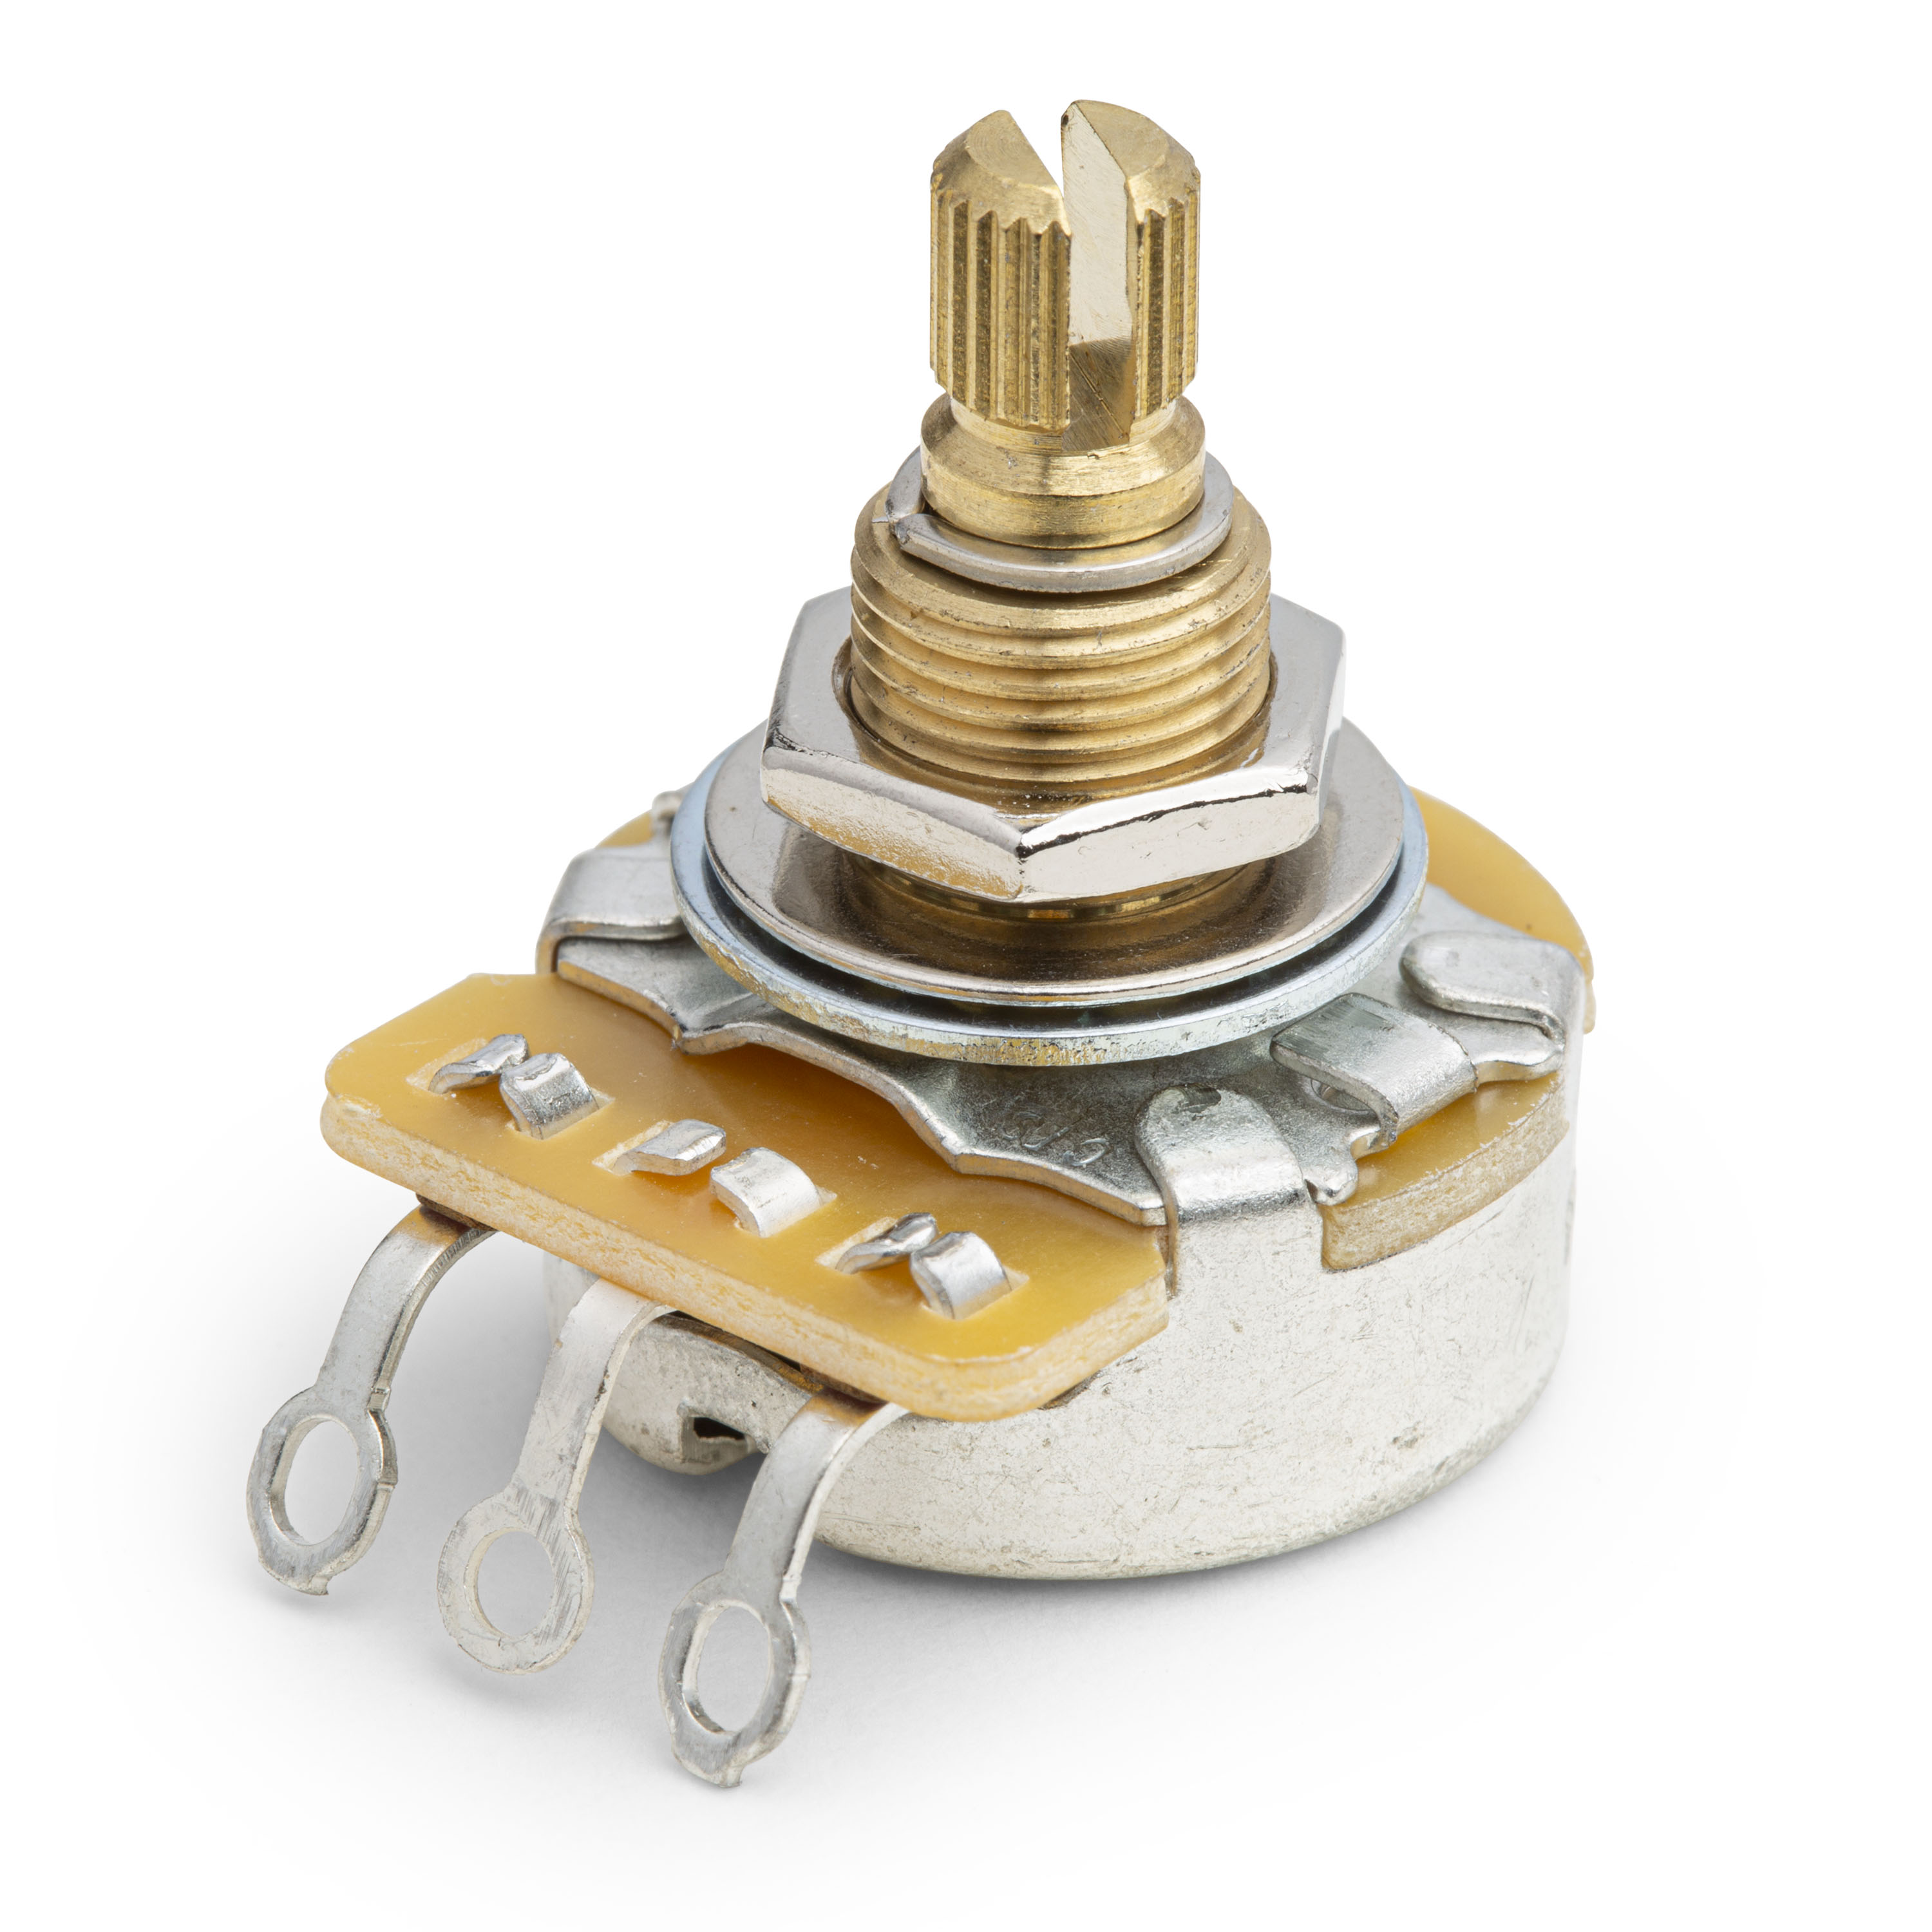 https://www.stewmac.com/globalassets/product-images/m001000/m001900/m001902-gibson-historic-500k-ohm-audio-taper-potentiometer/0338-1-3000.jpg?hash=637757899940000000